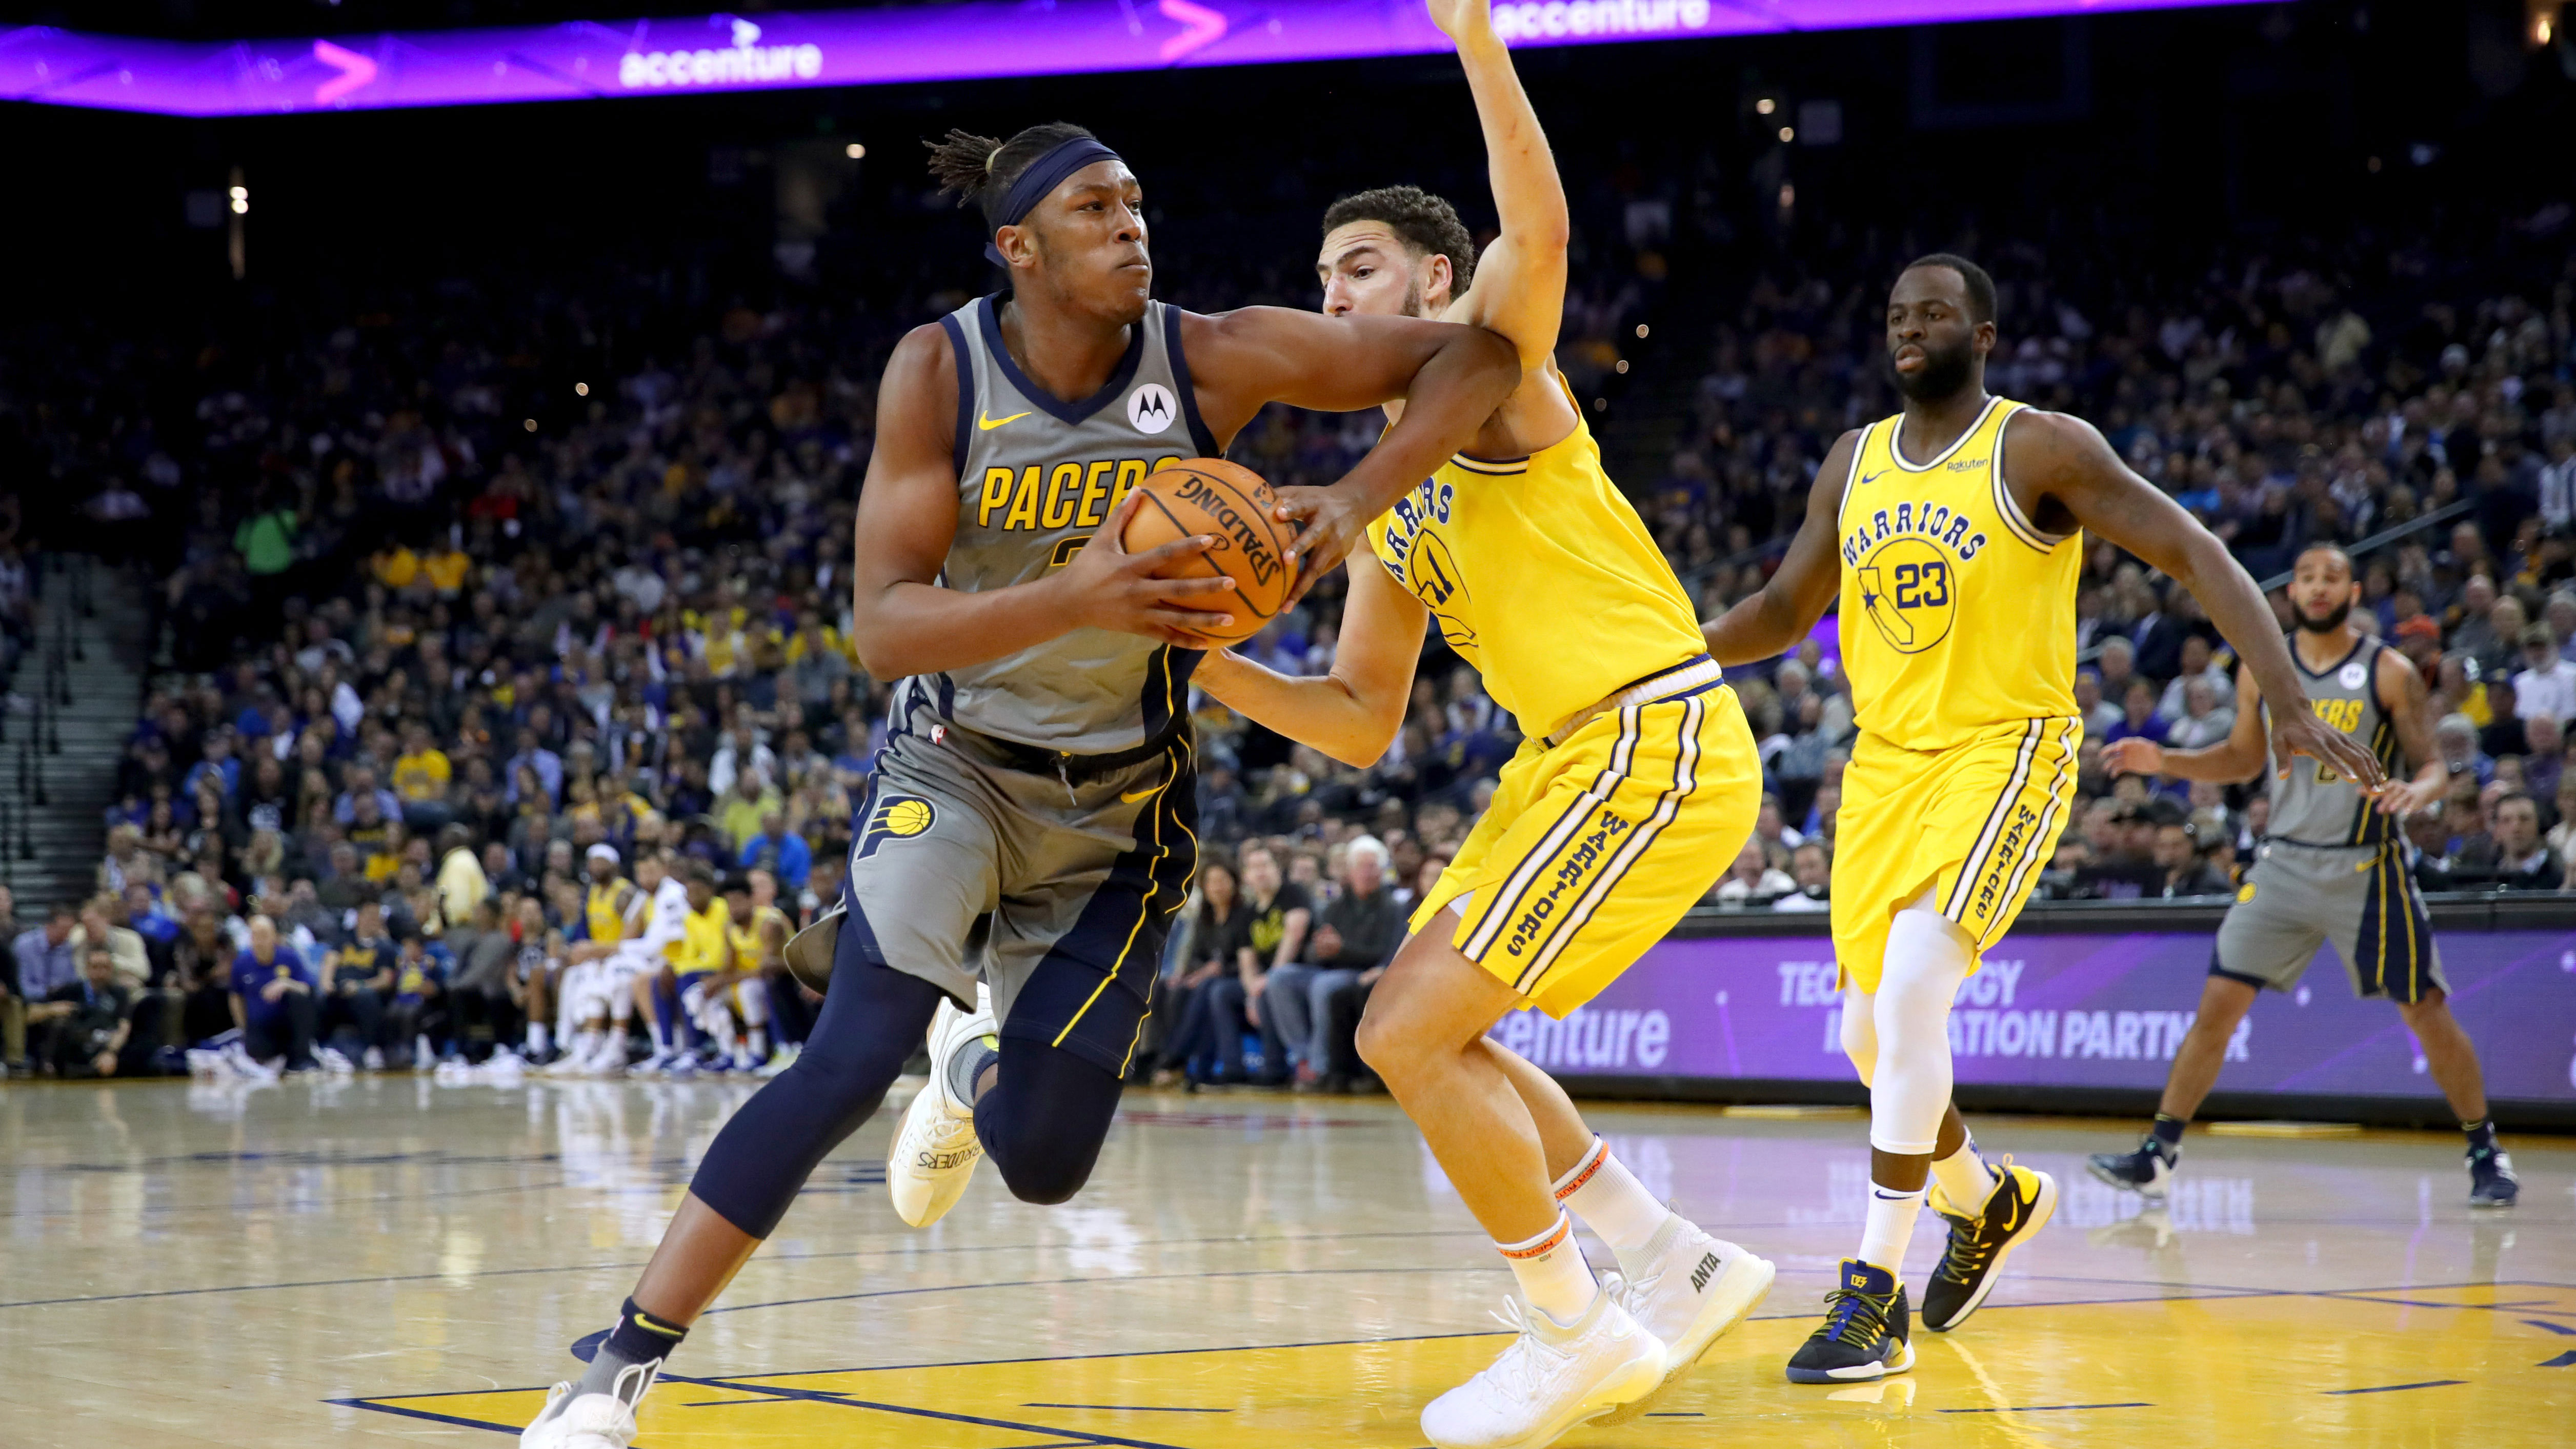 Pacers overmatched by Warriors in 112-89 loss